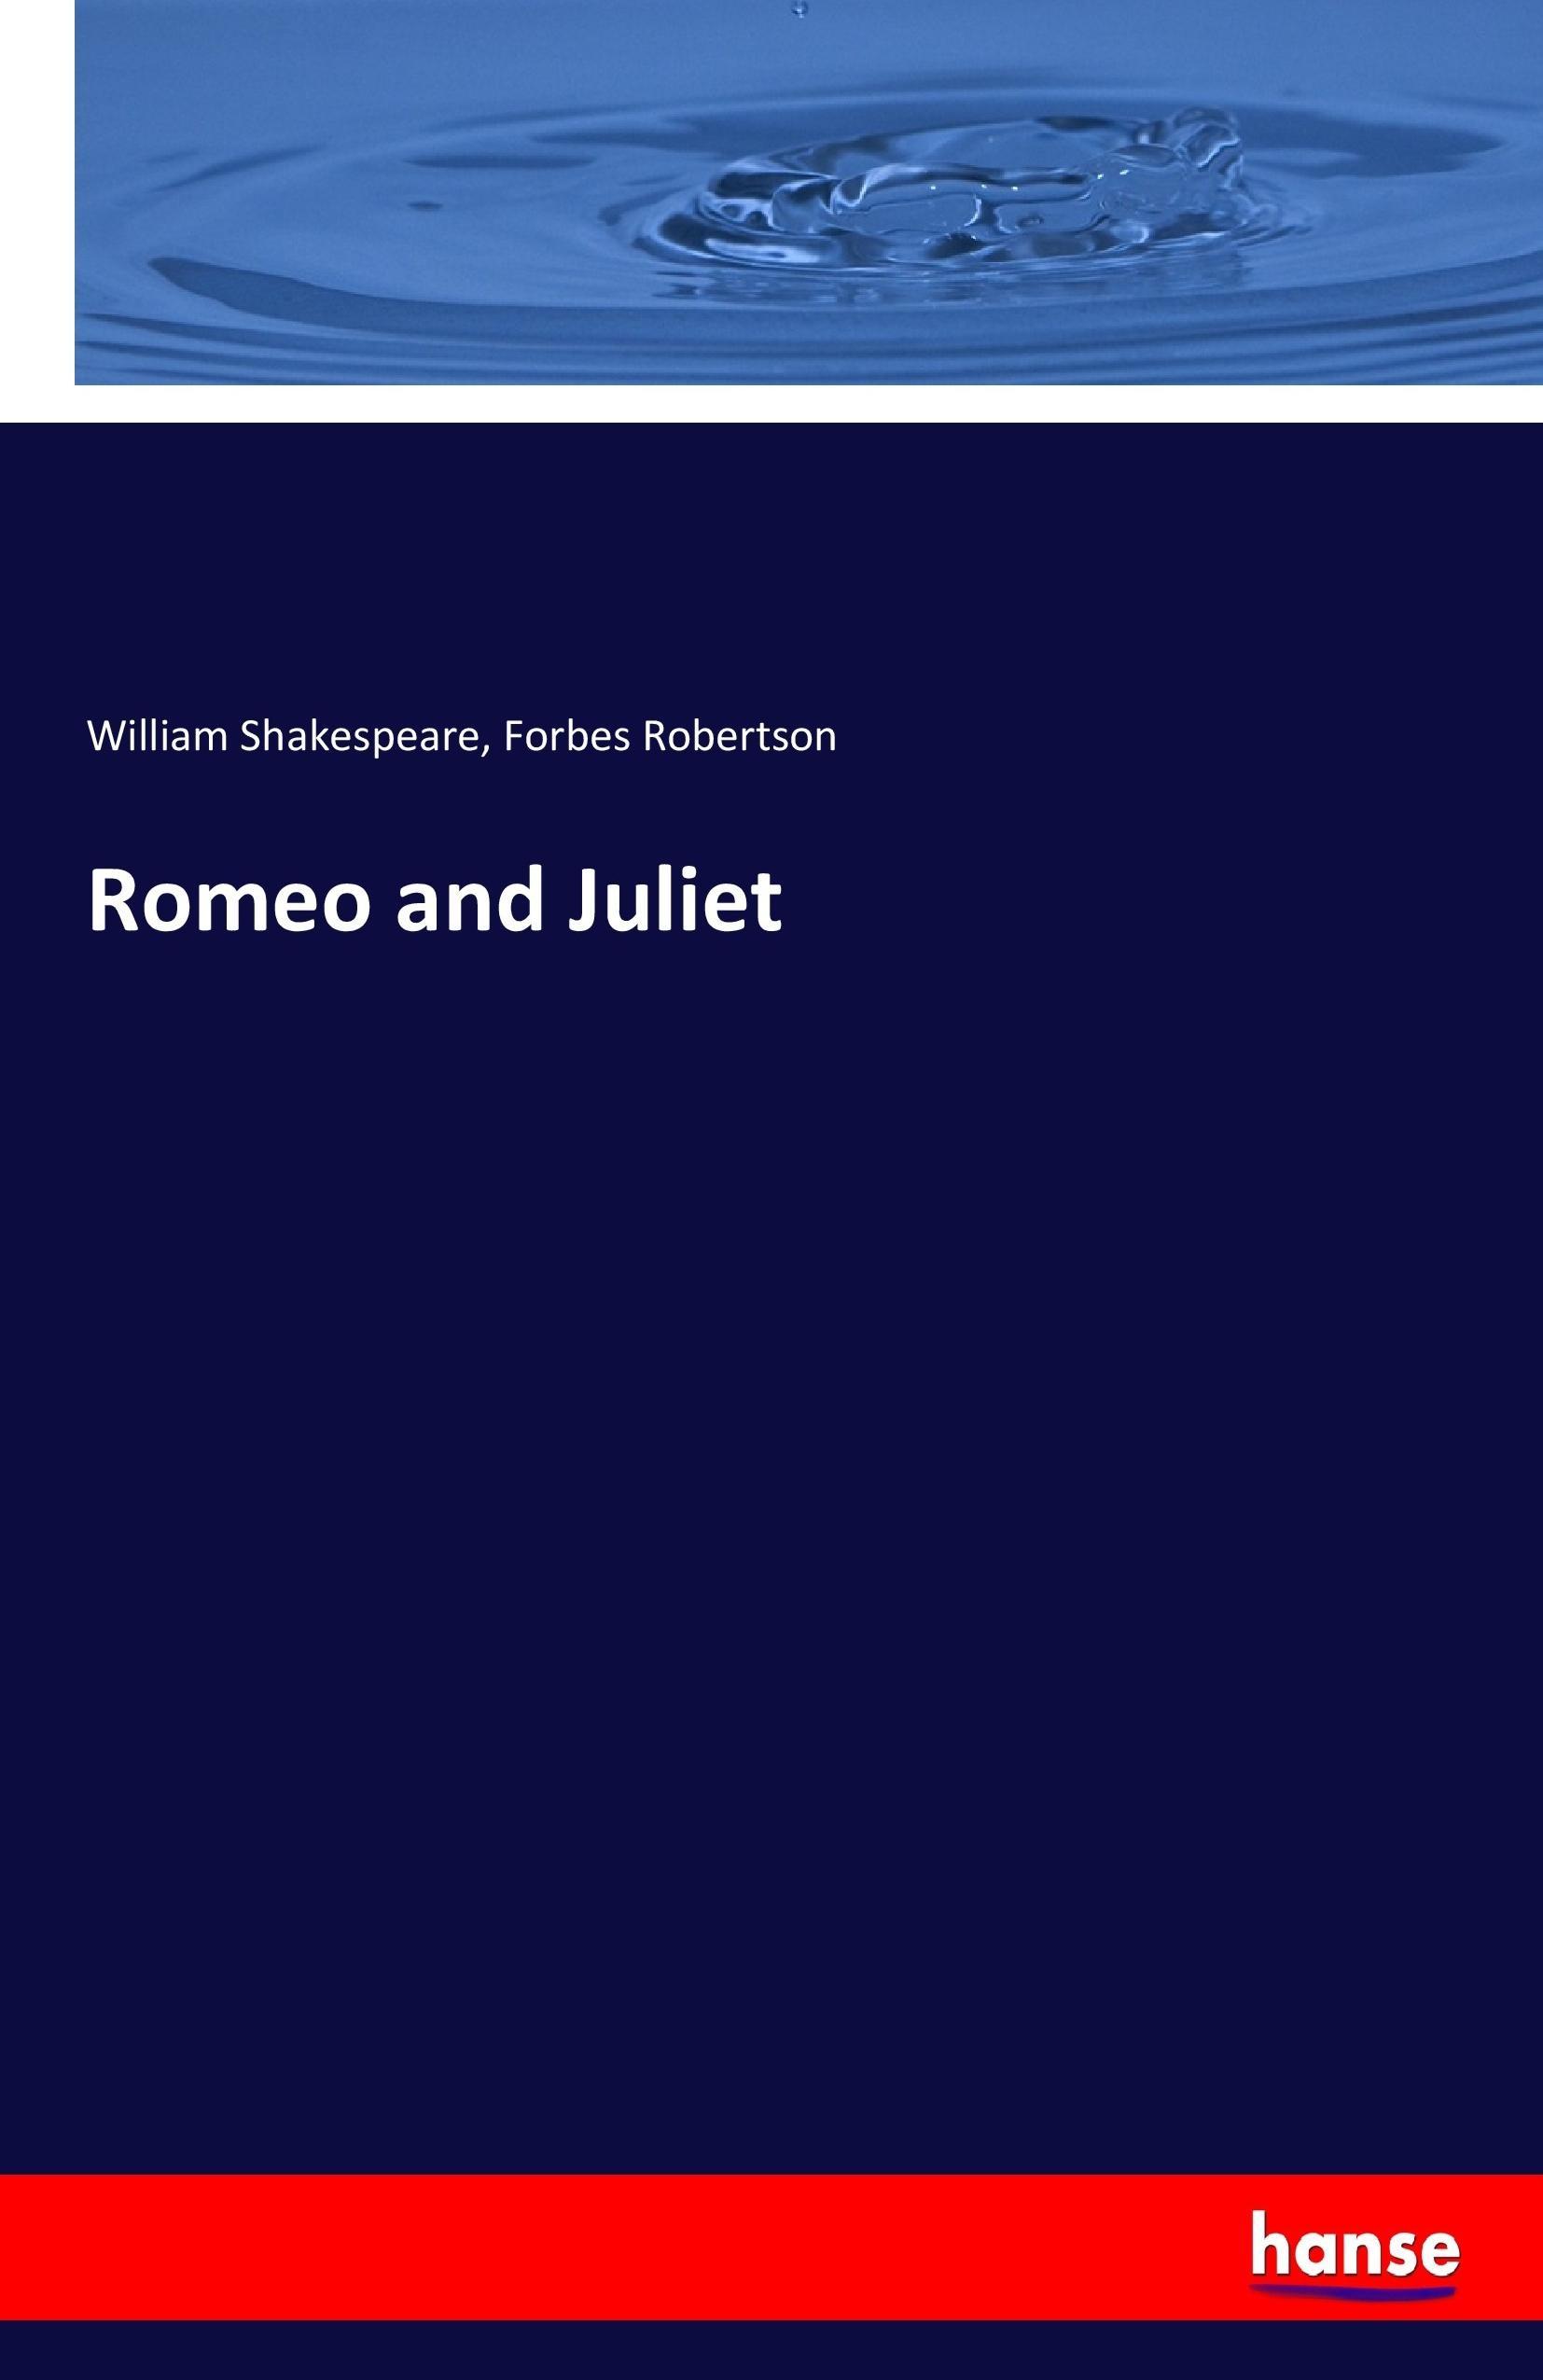 Romeo and Juliet - Shakespeare, William Robertson, Forbes